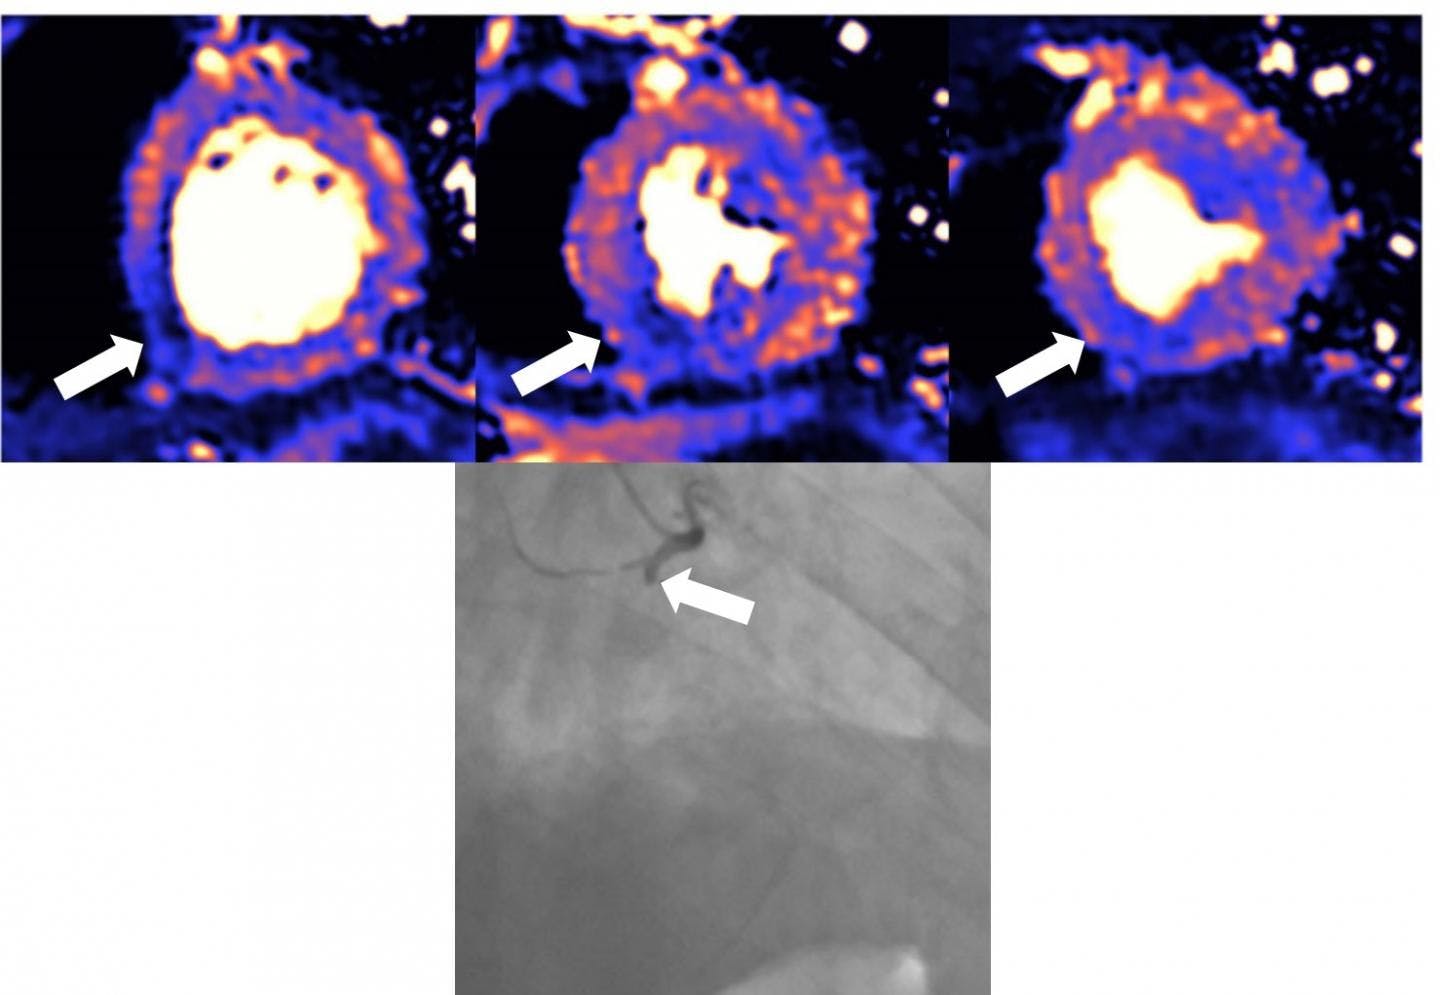 MRI scan of damaged heart. Blue means reduced blood flow, orange is good blood flow. In this figure the inferior part of the heart shows dark blue, so the myocardial blood flow is very reduced and the black and white angiography, which looks directly at the blood vessels, shows that the vessel which supplies the blood to this part of the heart is occluded. The 3 colored images are 3 different slices of the heart: the basal the mid and the apical slice.

CREDIT

European Heart Journal